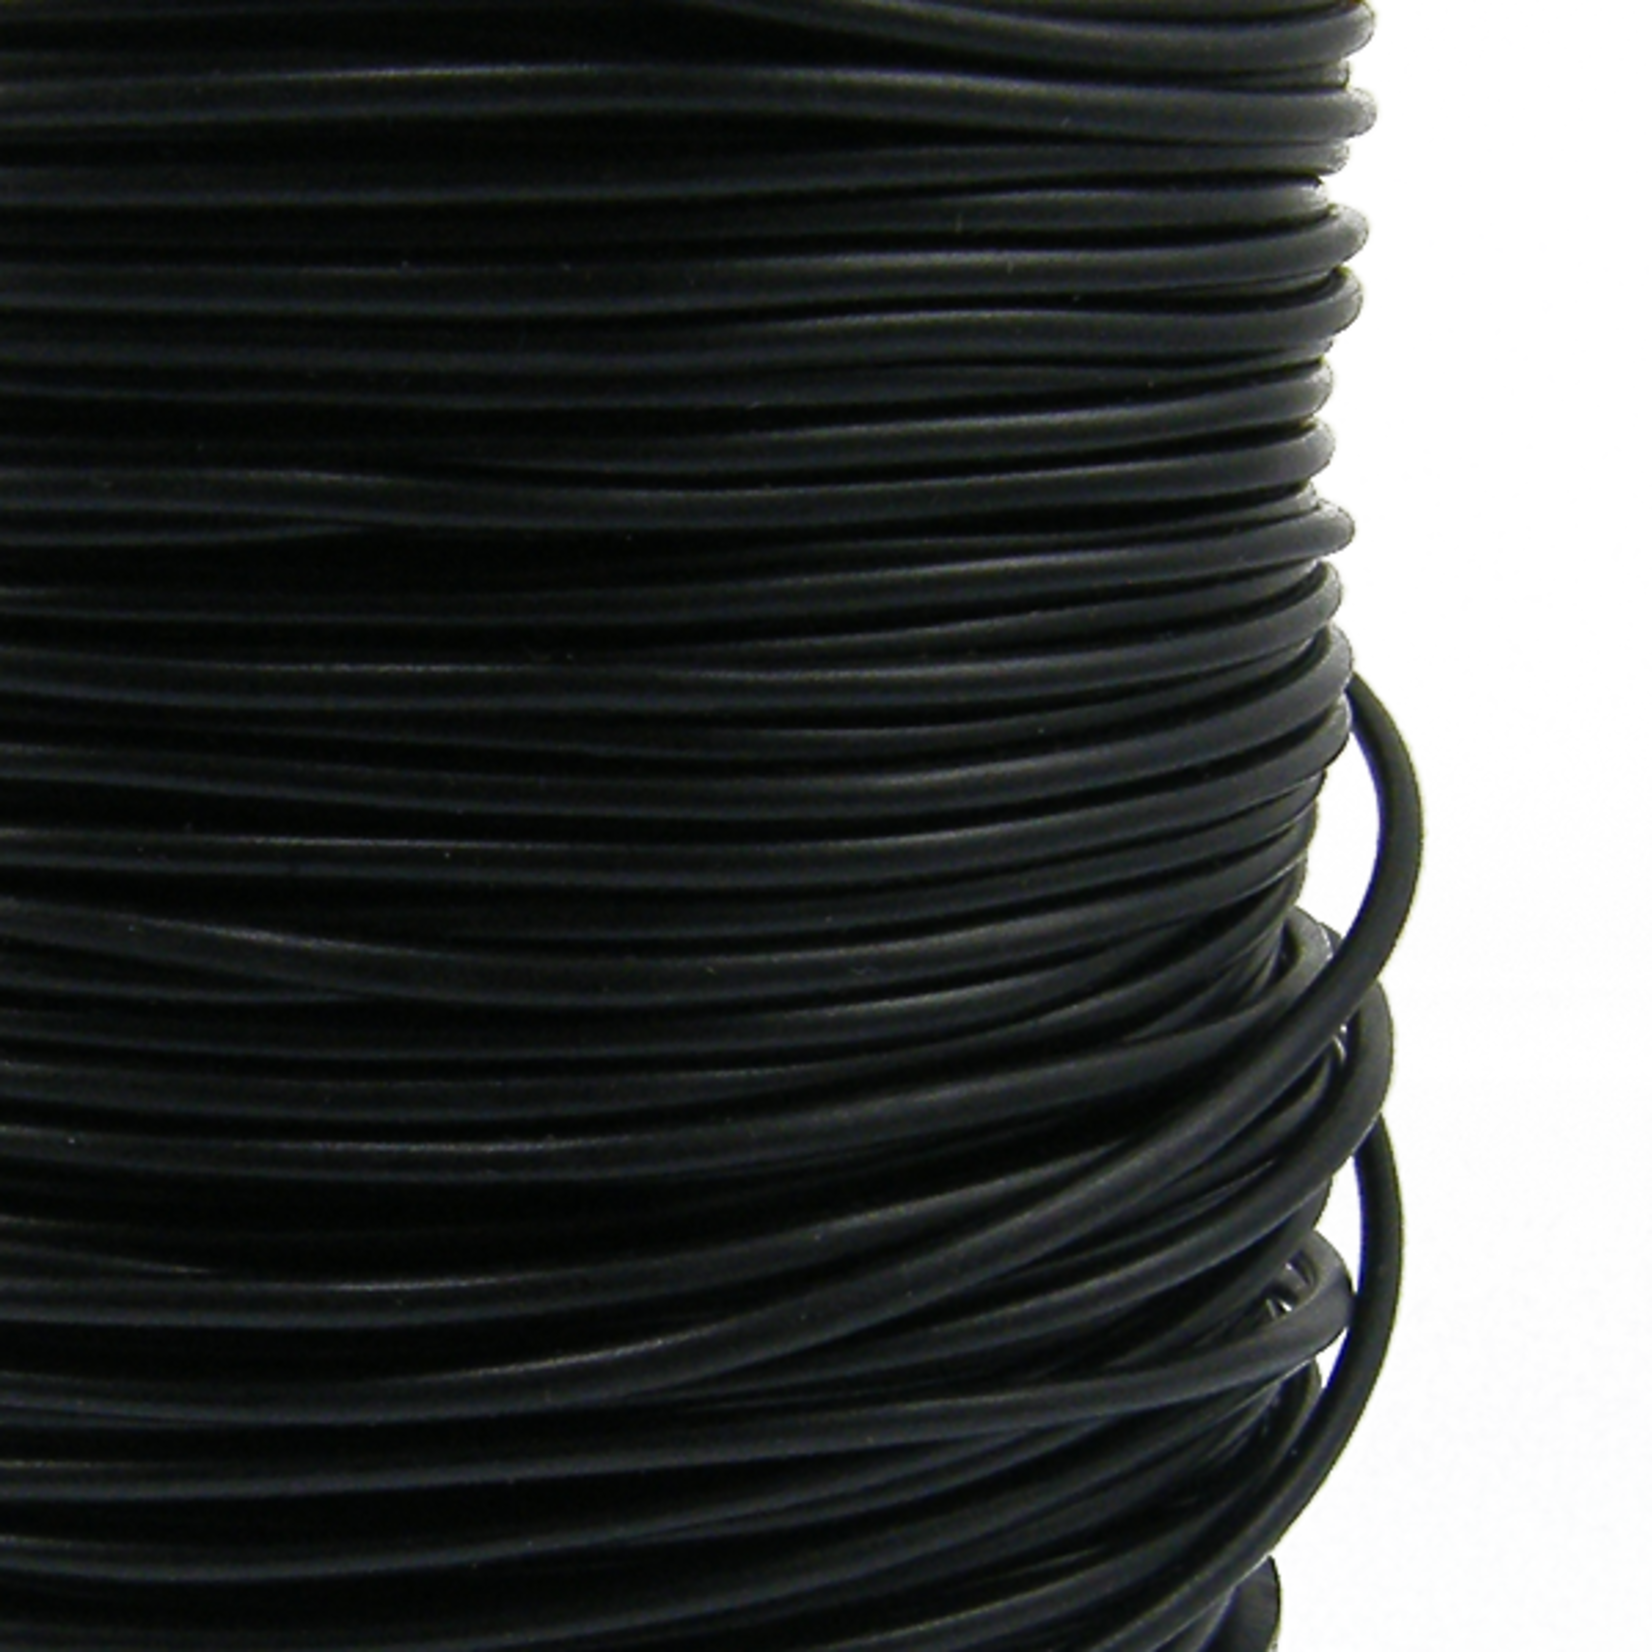 P'Leather 2mm Round Cord - 1 foot